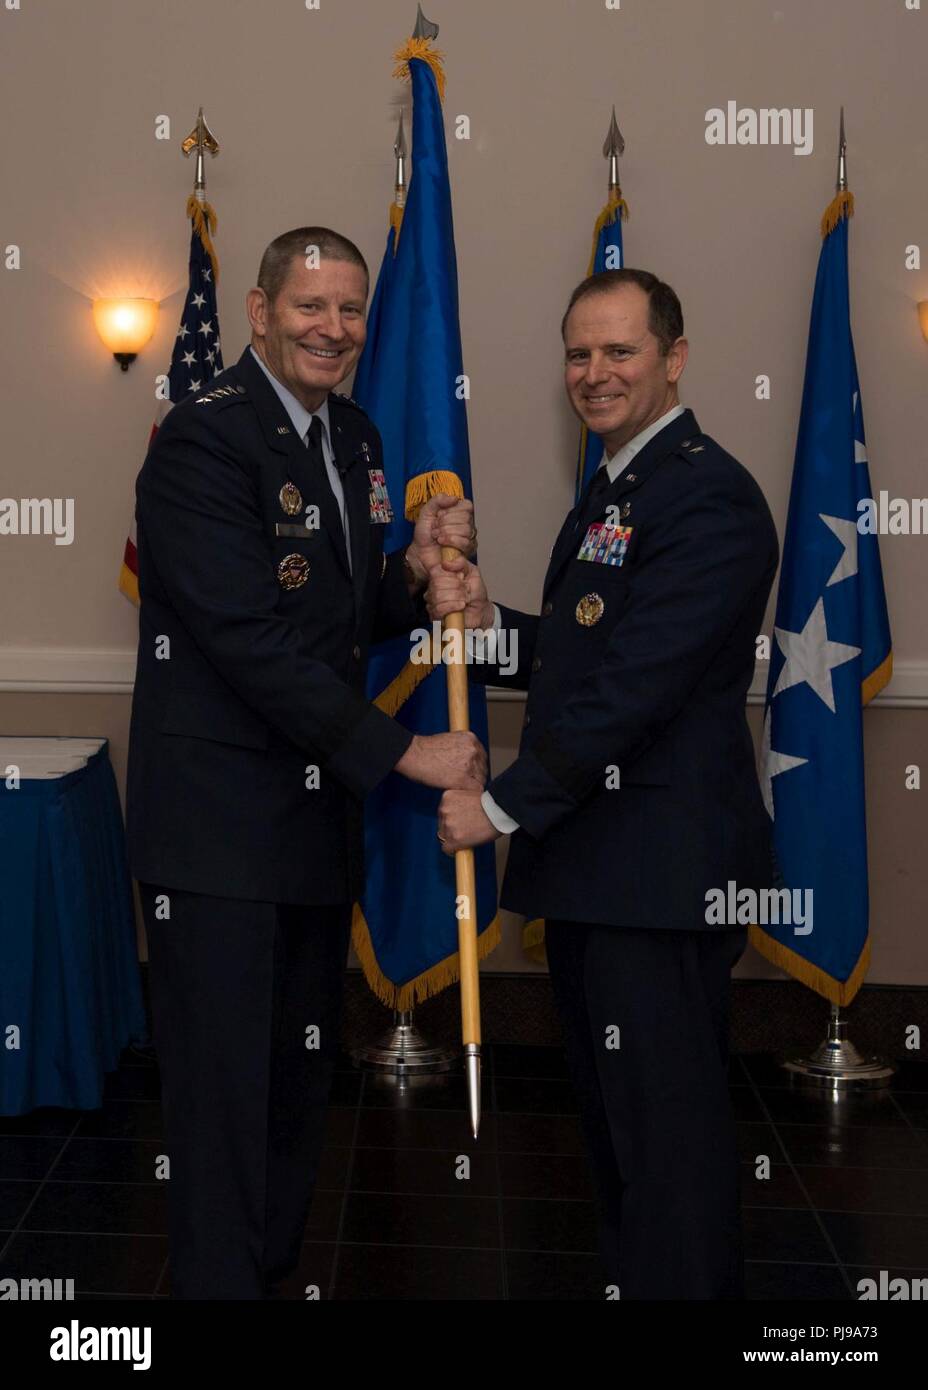 Brig. Gen. Eric H. Froehlich, Air Force Global Strike Command logistics, engineering and force protection director, promotes from the rank of Colonel to Brigadier General by Gen. Robin Rand, AFGSC commander, at Barksdale Air Force Base, La., July 6, 2018. Stock Photo